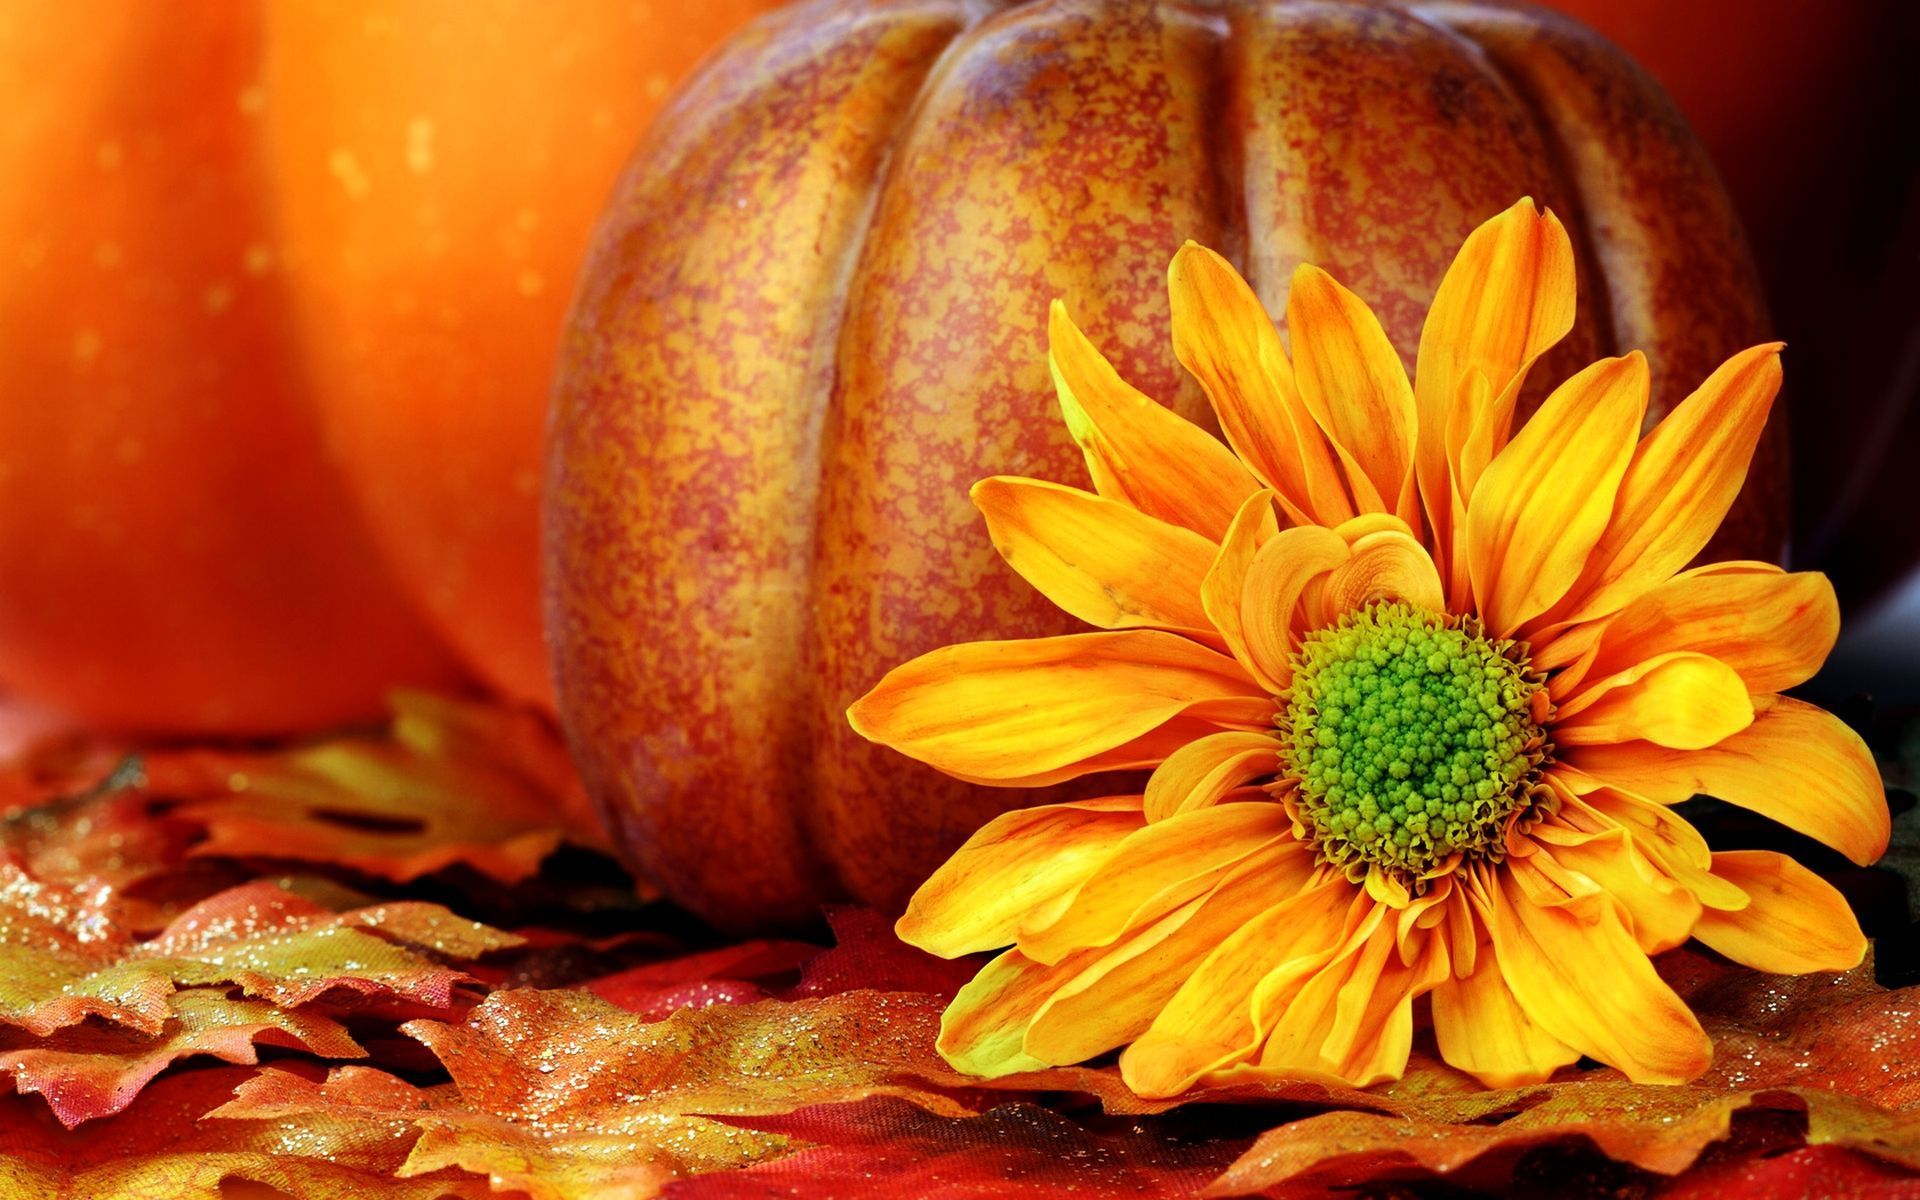 Pumpkins And Flowers Images Wallpapers